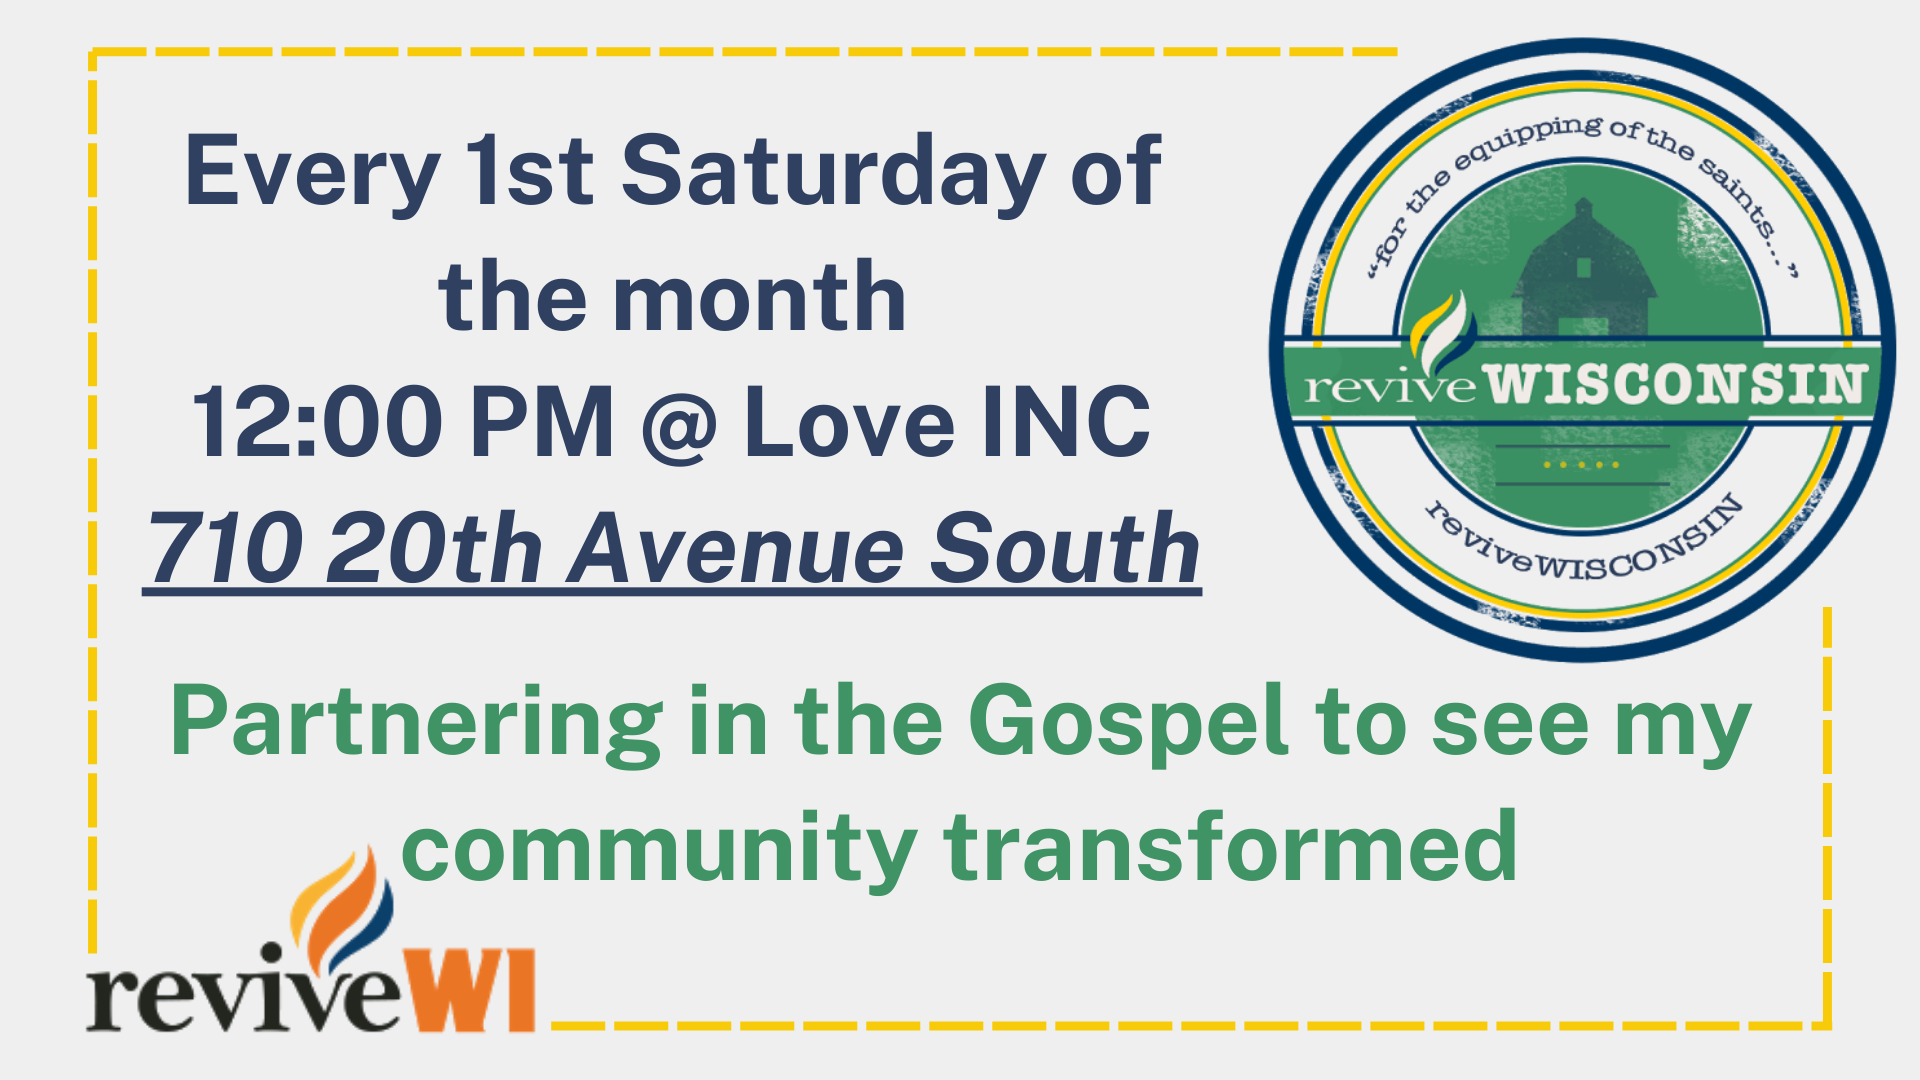 Time to Revive Every 1st Saturday of the month 12:00 pm @ Love INC Partnering in the Gospel to see my community transformed